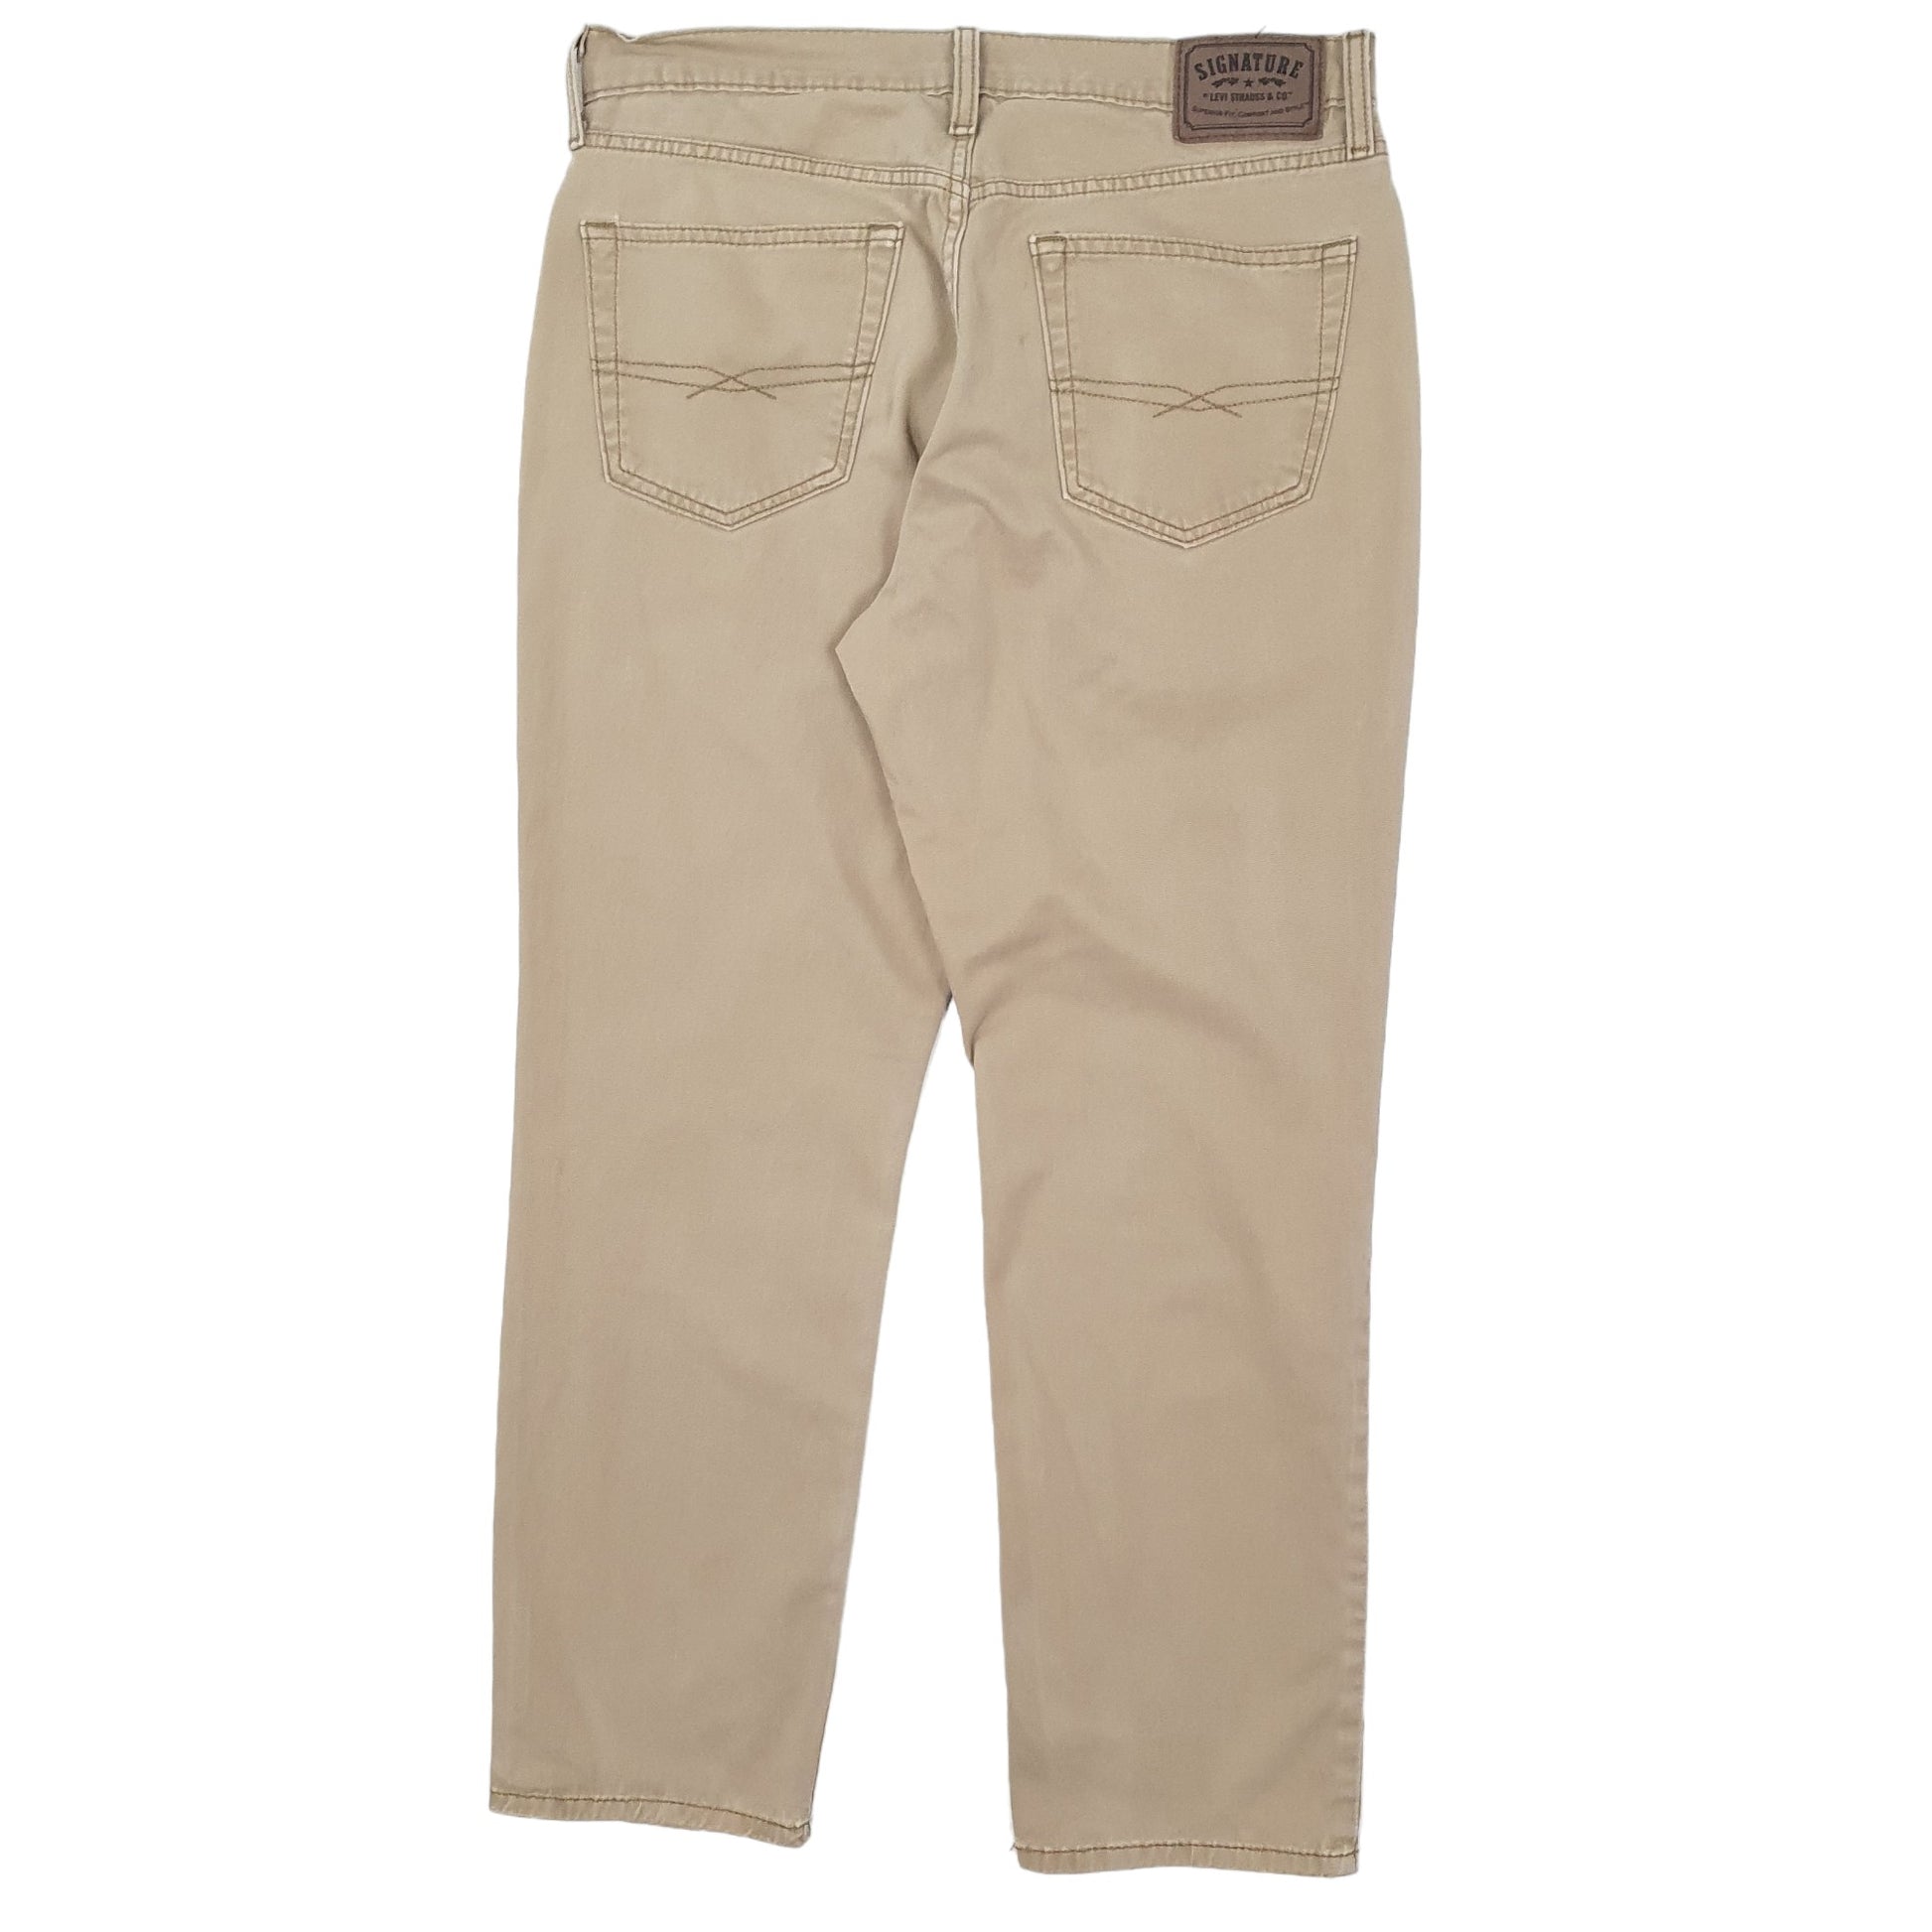 Mens Beige Levis Signature Chino Trousers